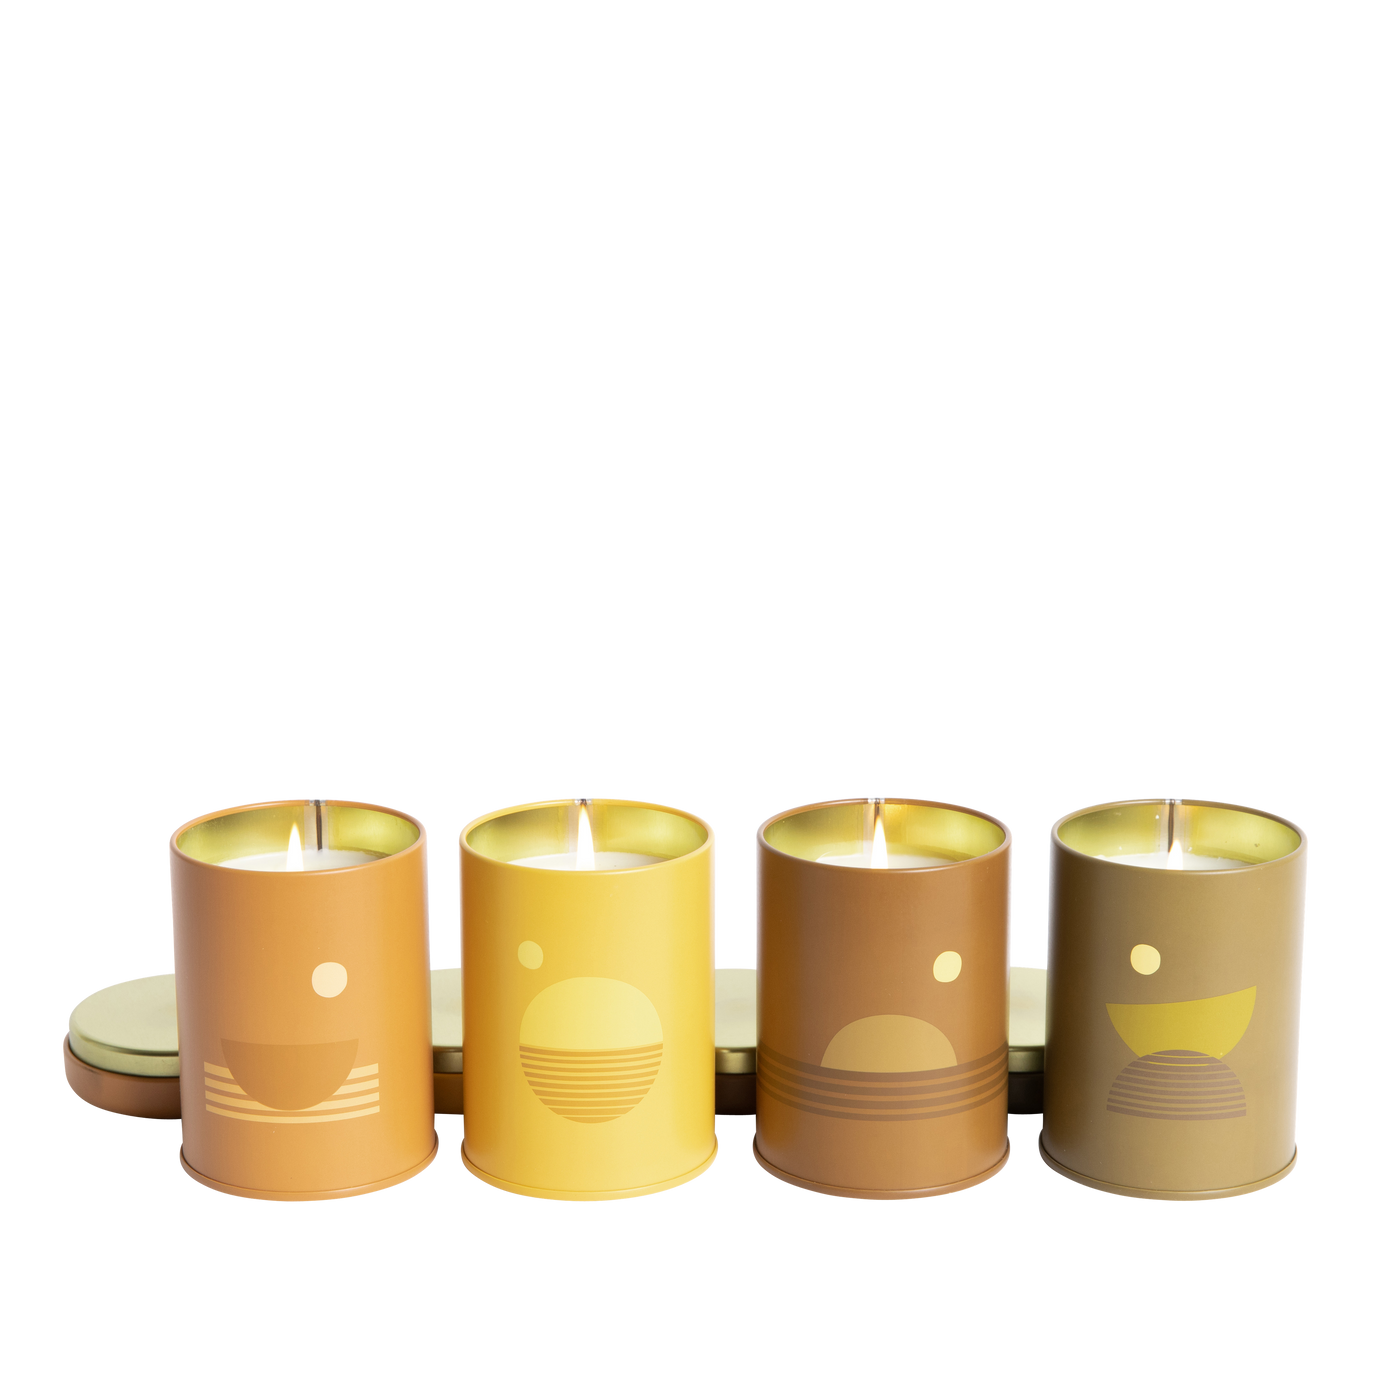 Swell Sunset Soy Candle